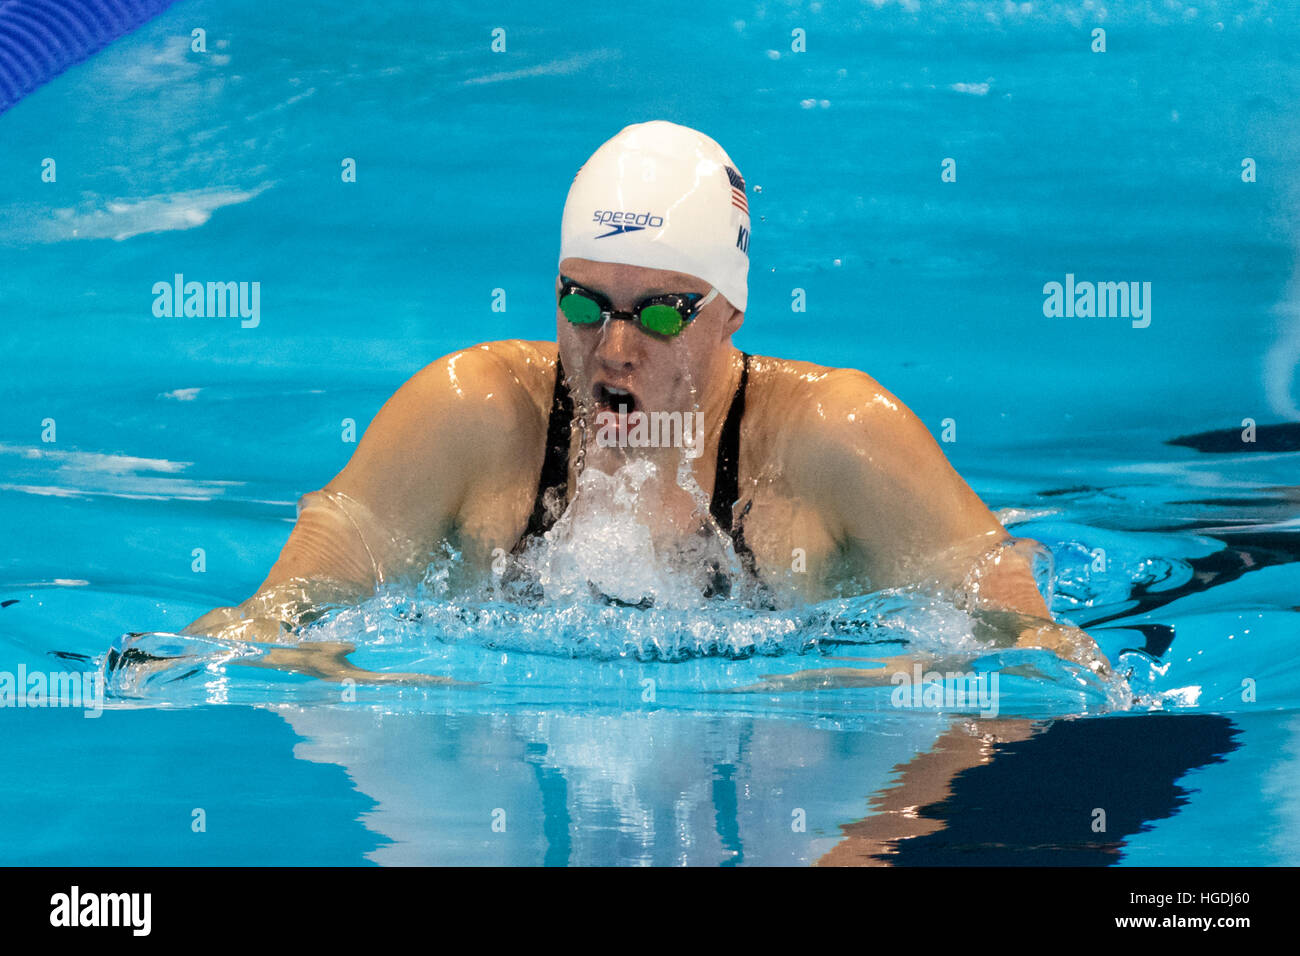 Rio de Janeiro, Brazil. 10 August 2016. Lilly King (USA) competing in the women's 200m breaststroke heat at the 2016 Olympic Summer Games. ©Paul J. Su Stock Photo